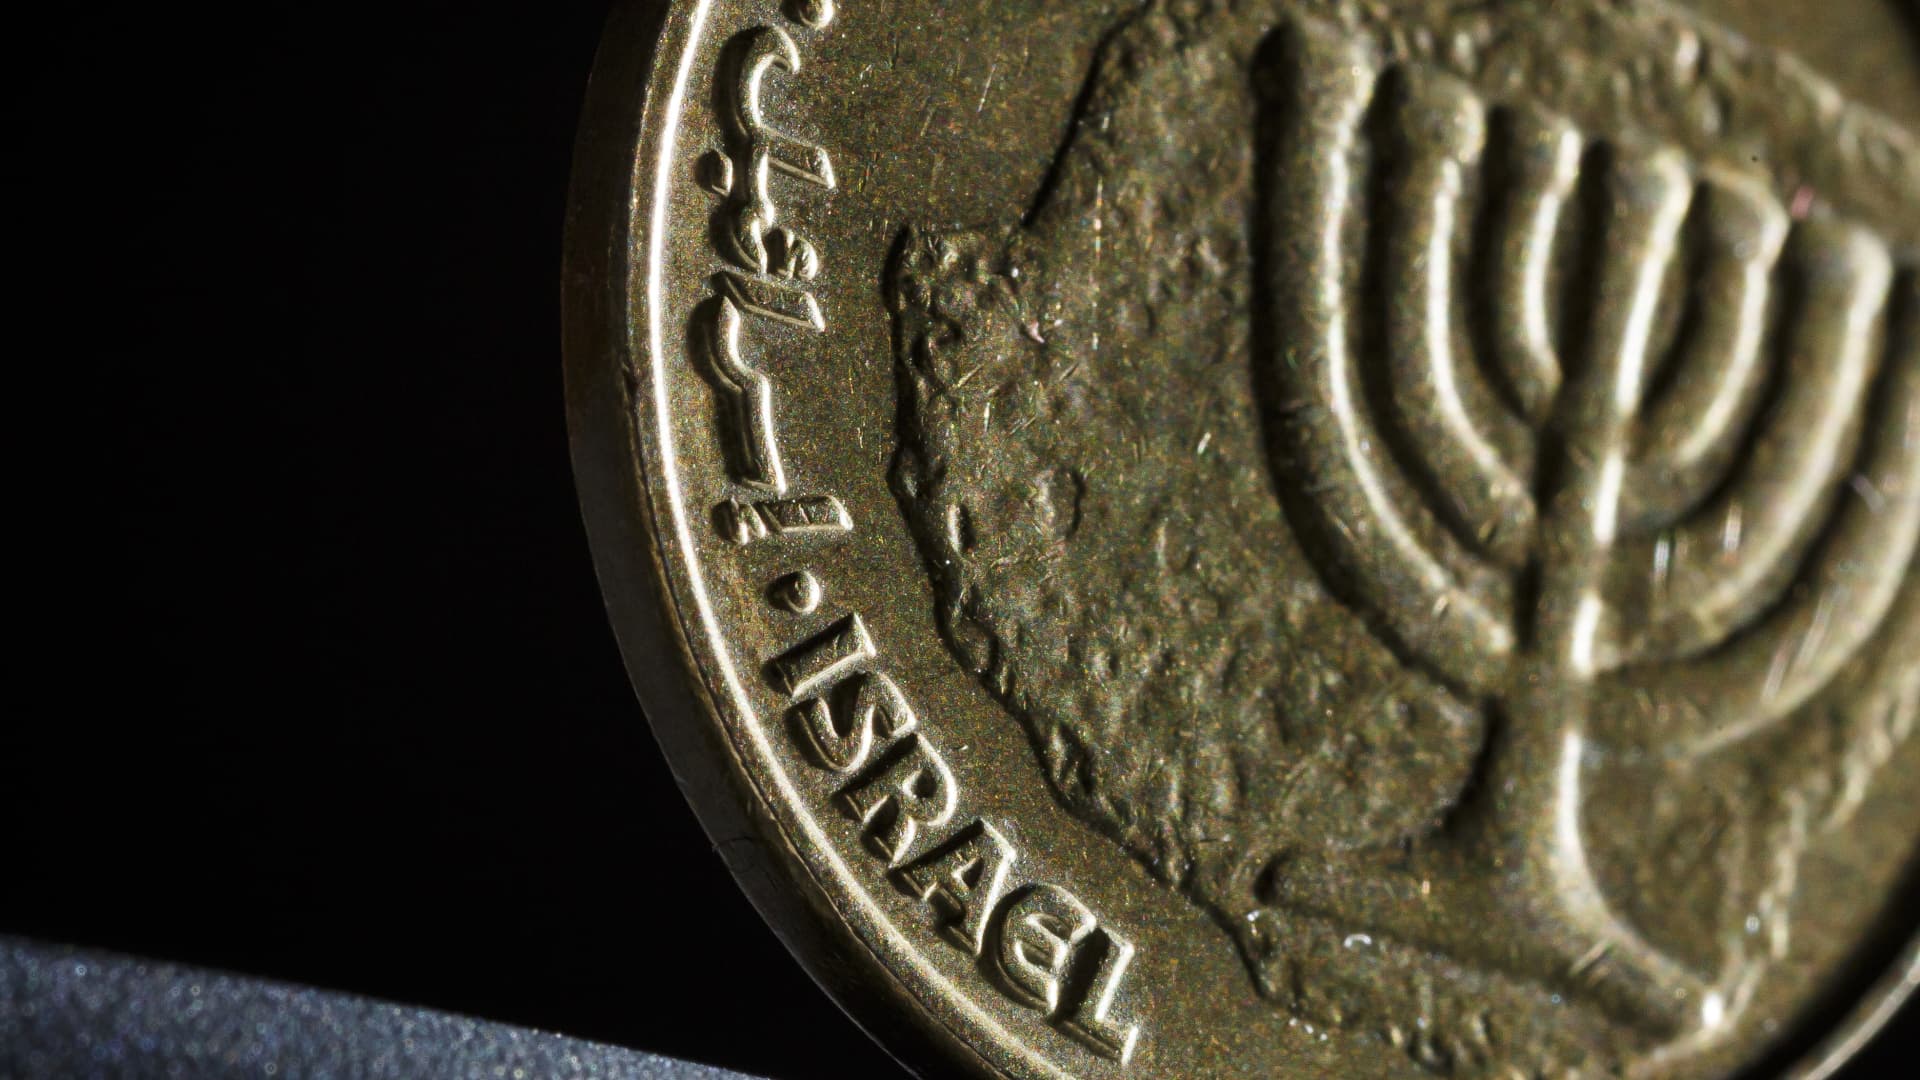 BERLIN, GERMANY - JANUARY 06: The lettering Israel is seen on a 10 agorot coin stands on a table on January 06, 2015 in Berlin, Germany. The currency of the State of Israel is called New Israeli Shekel (NIS). The shekel consists of 100 agorot. (Photo Illustration by Thomas Trutschel/Photothek via Getty Images)